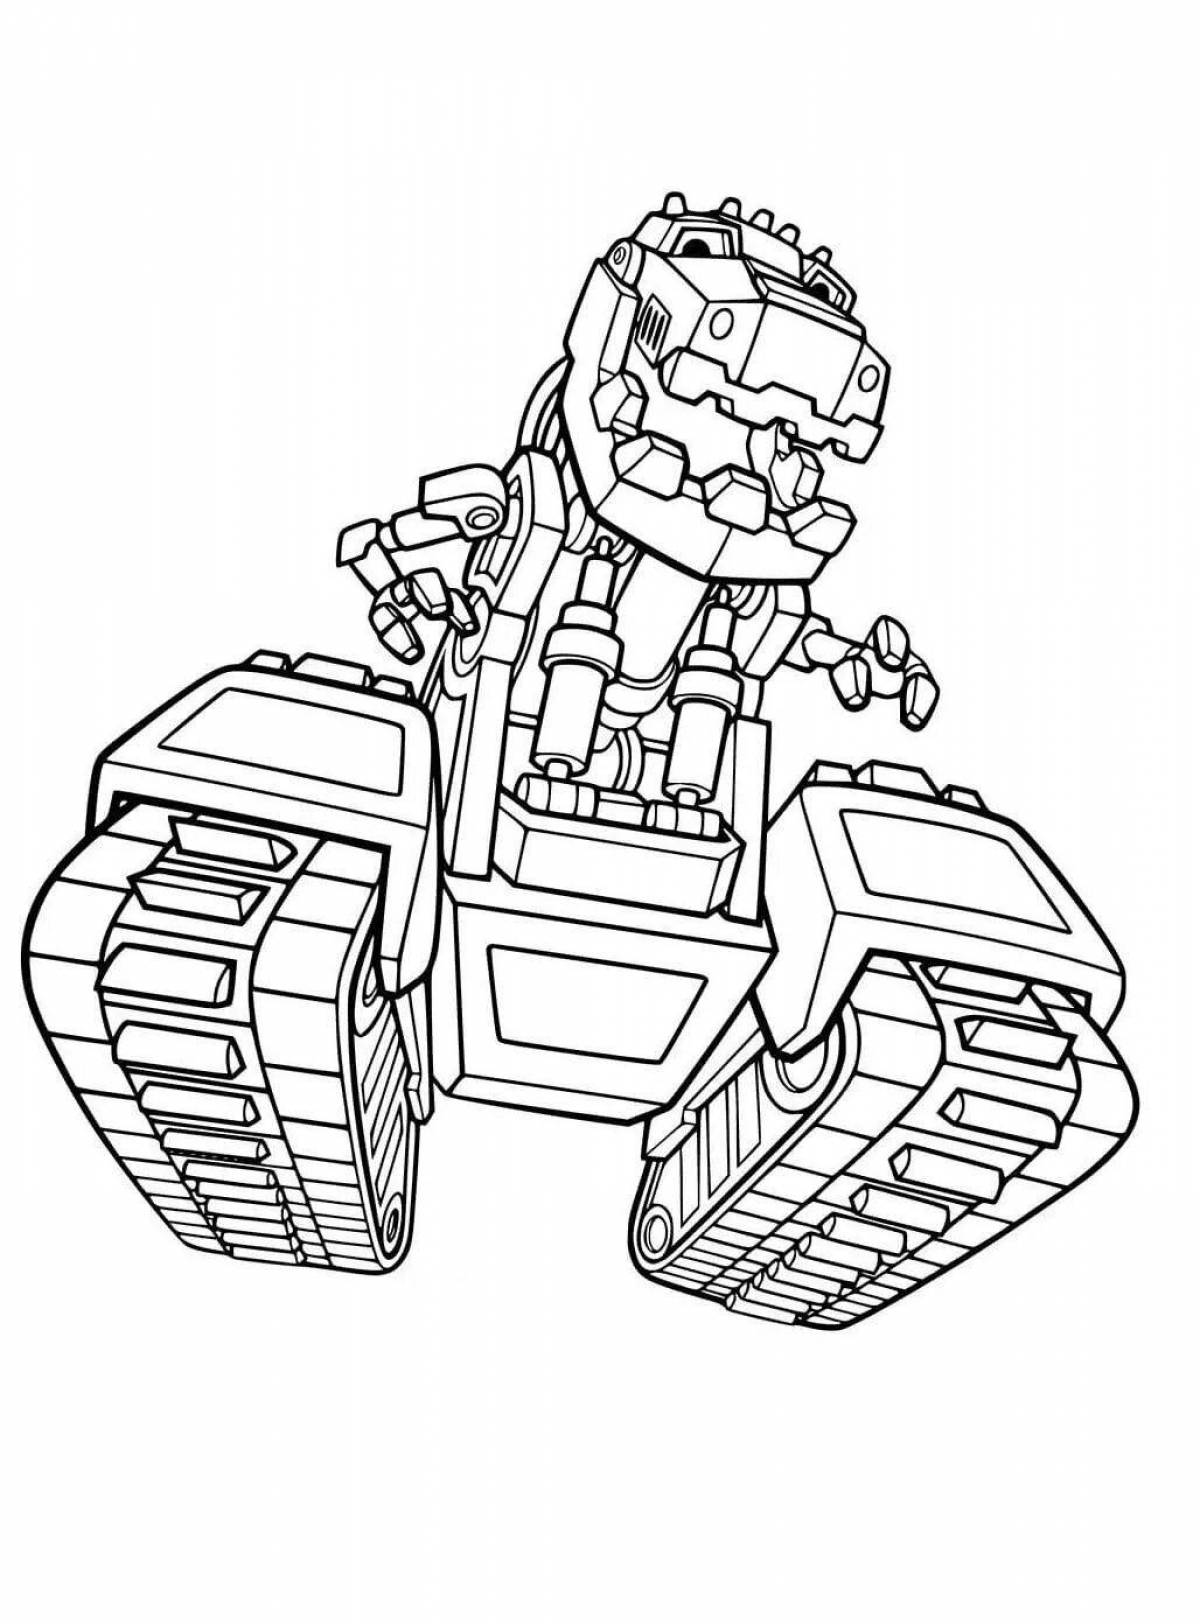 Robot tractor fun coloring page